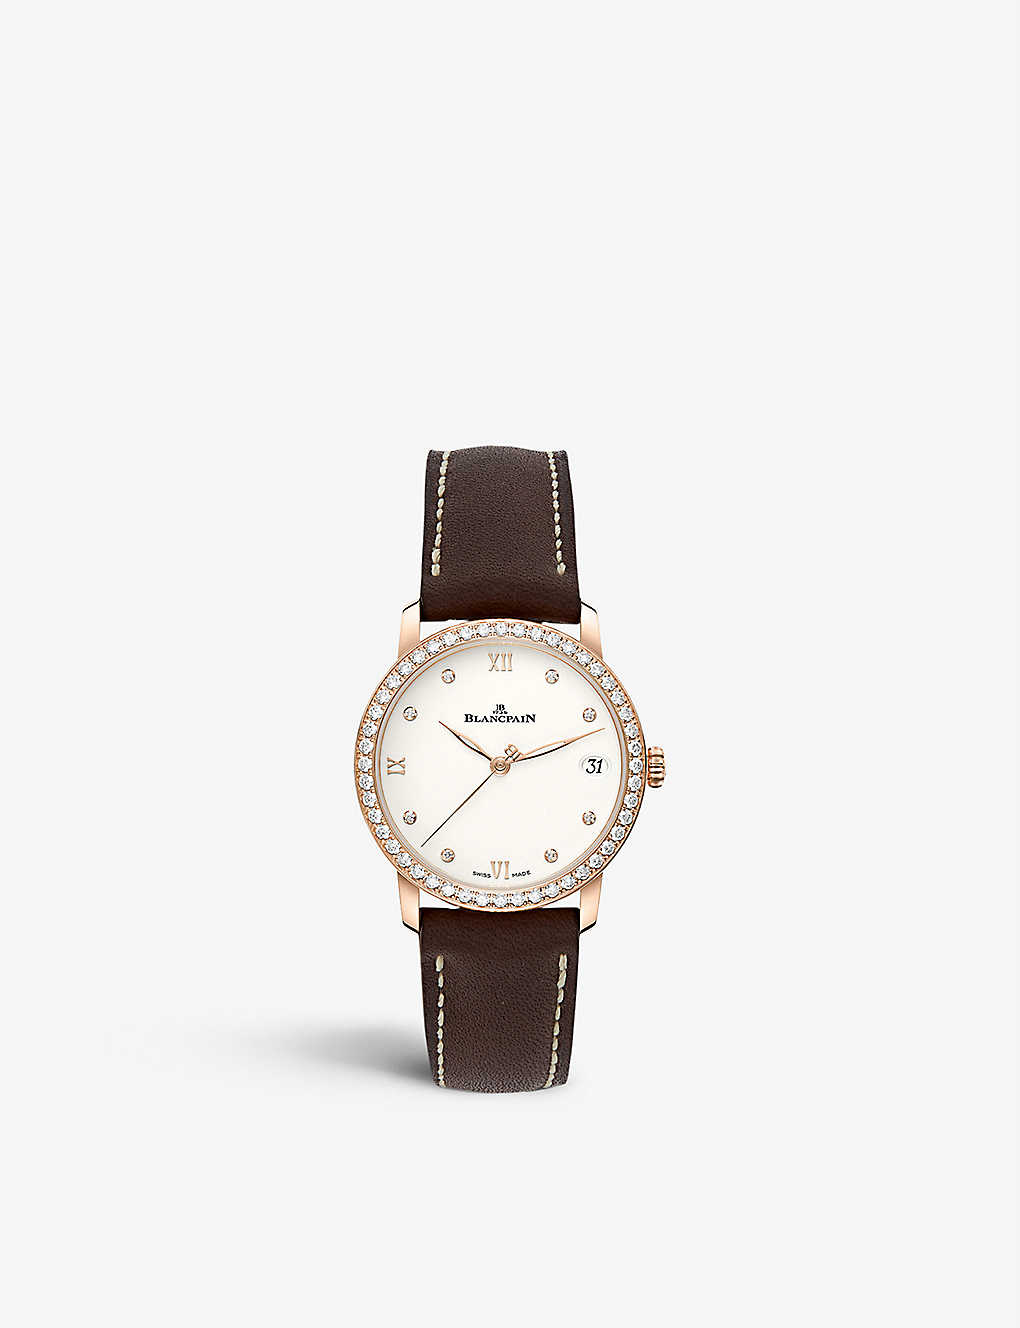 BLANCPAIN BLANCPAIN WOMENS OPALIN DIAL 6127-2987-55 VILLERET DIAMOND SET AND LEATHER AUTOMATIC WATCH